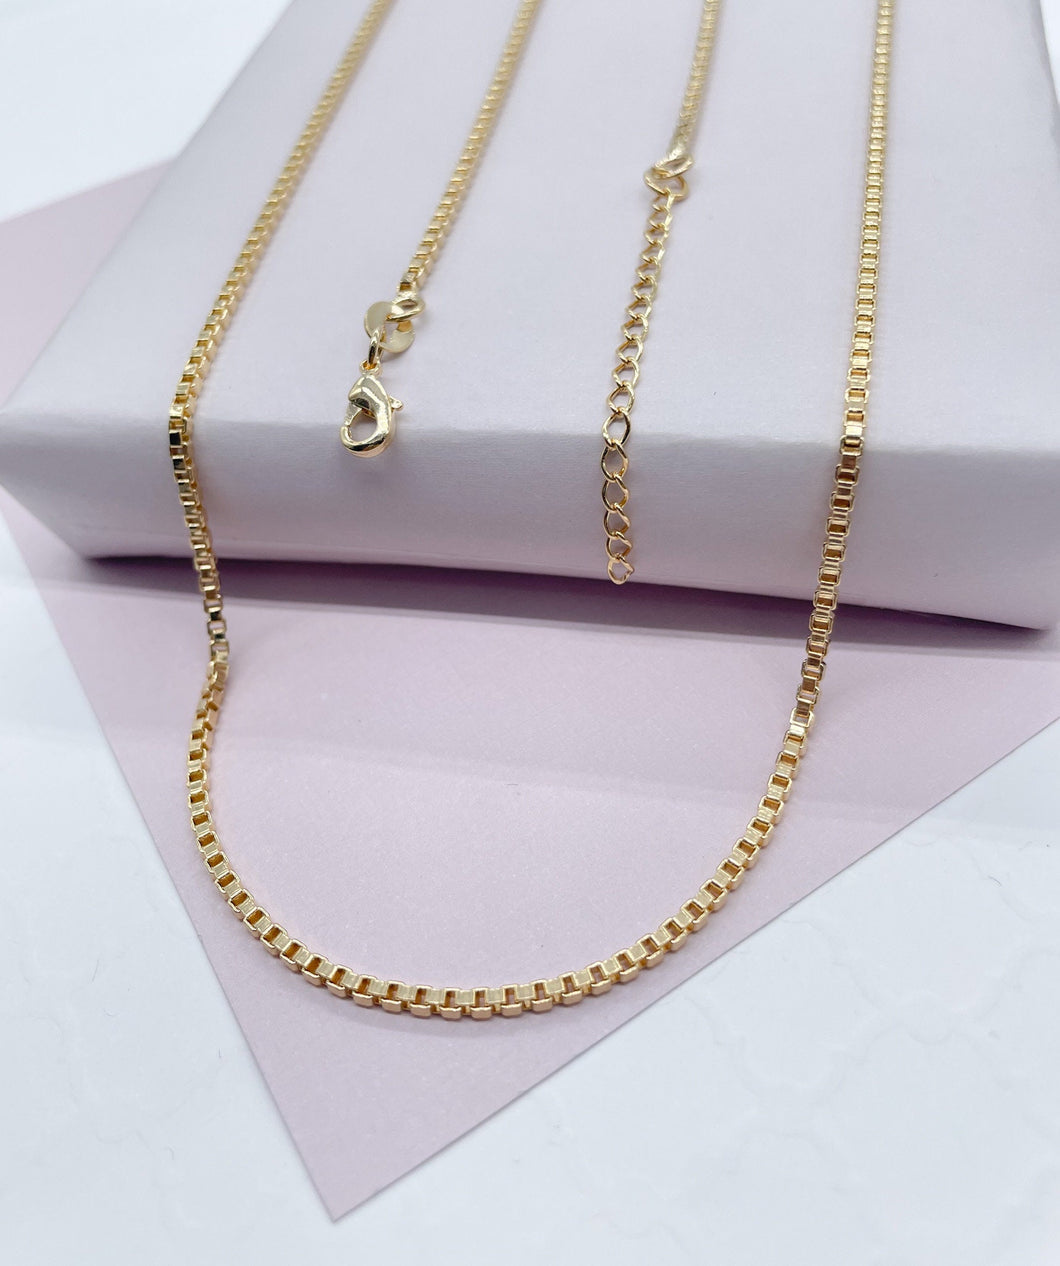 Dainty 18k Gold Filled 2mm Box Chain Necklace for Wholesale Jewelry Making